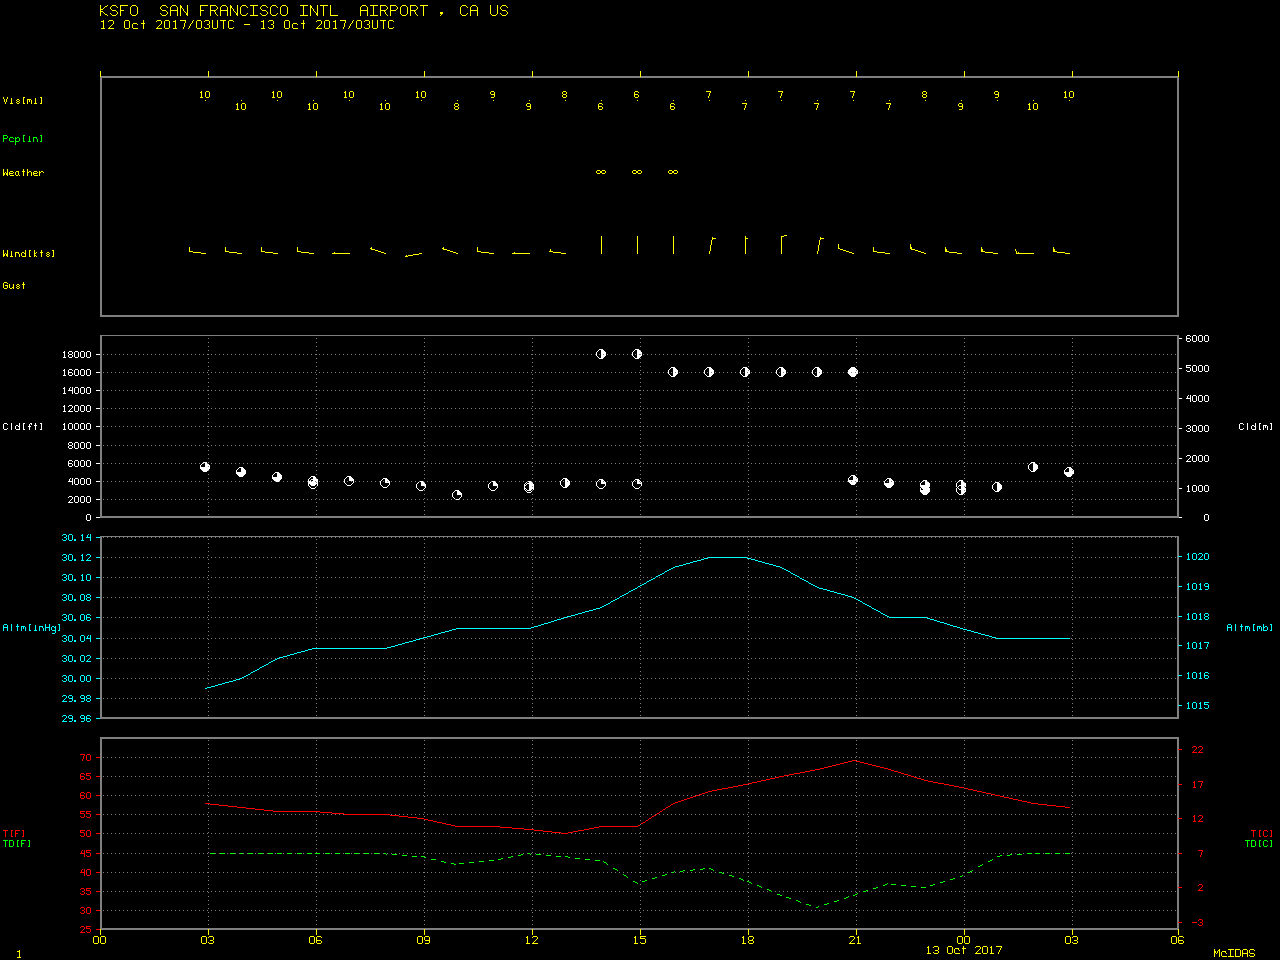 Time series plot of surface observations at San Francisco International Airport [click to enlarge]